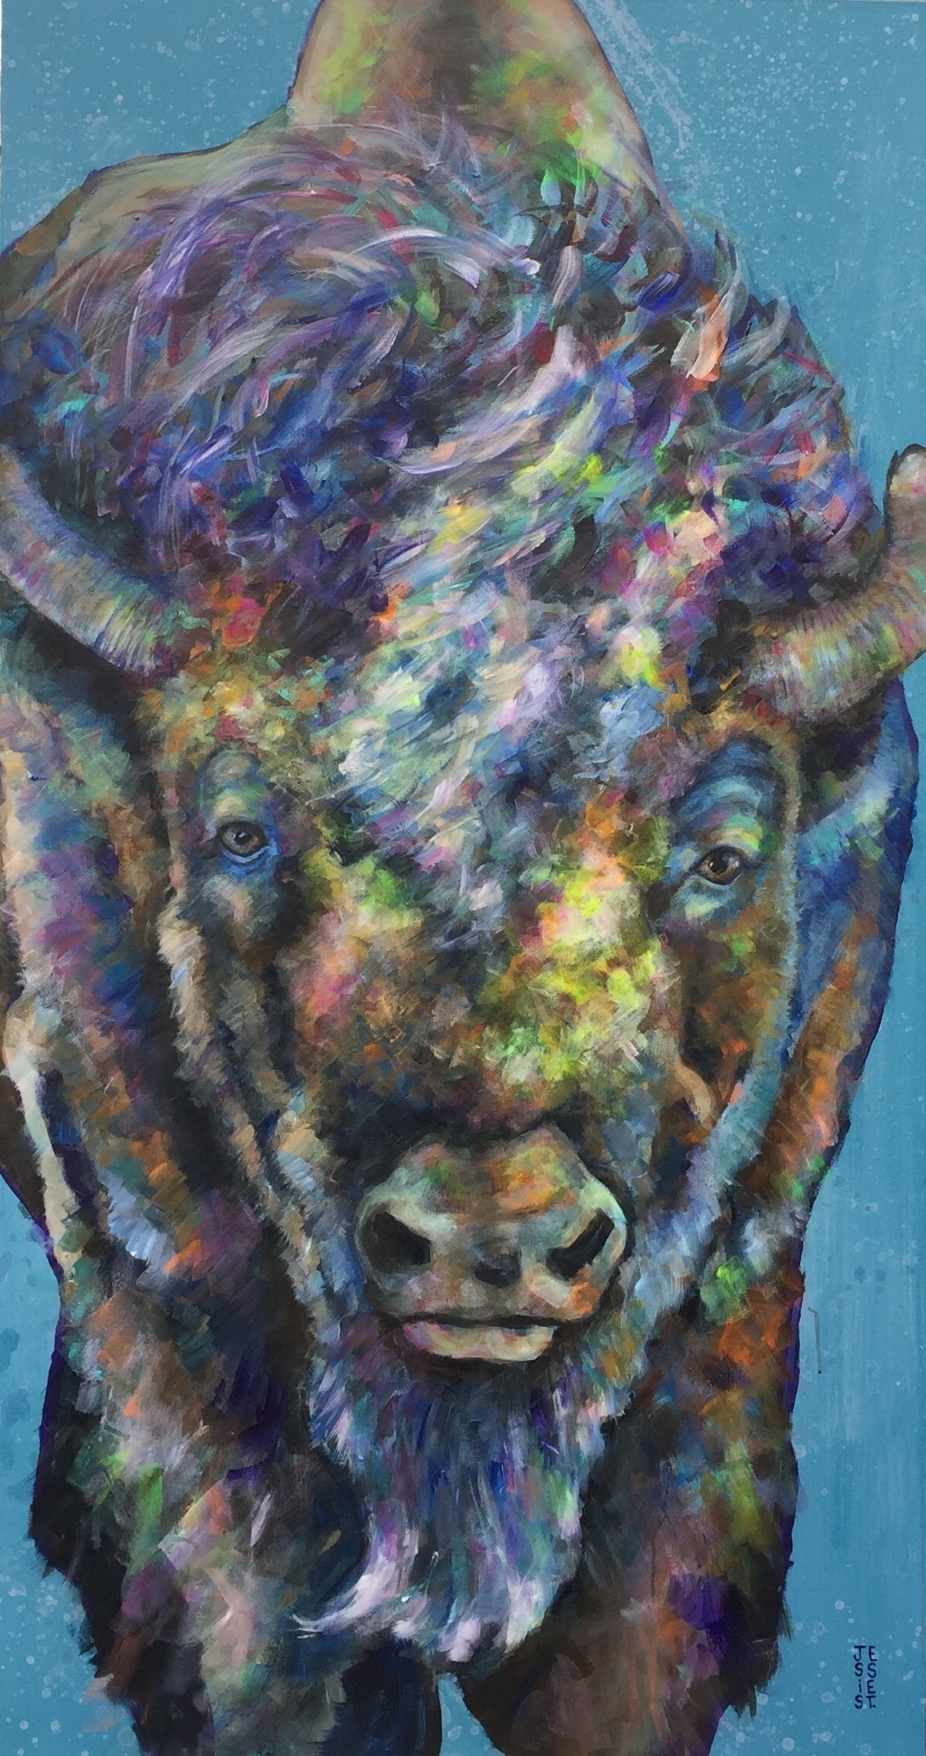 Bison Love; Acrylic on canvas; 52” x 40”.